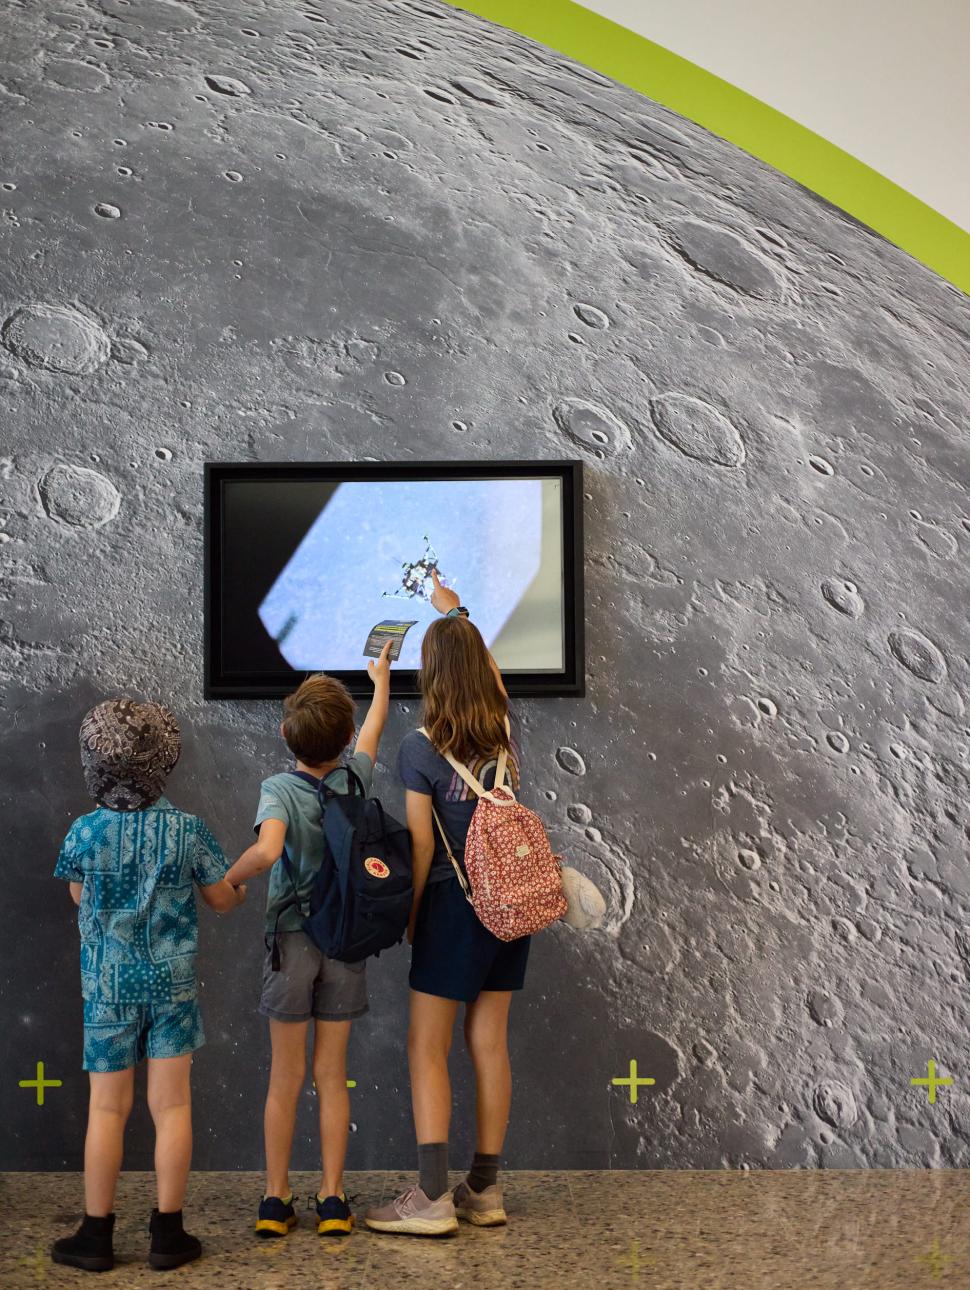 3 children stand in front a screen with moon images on it. 